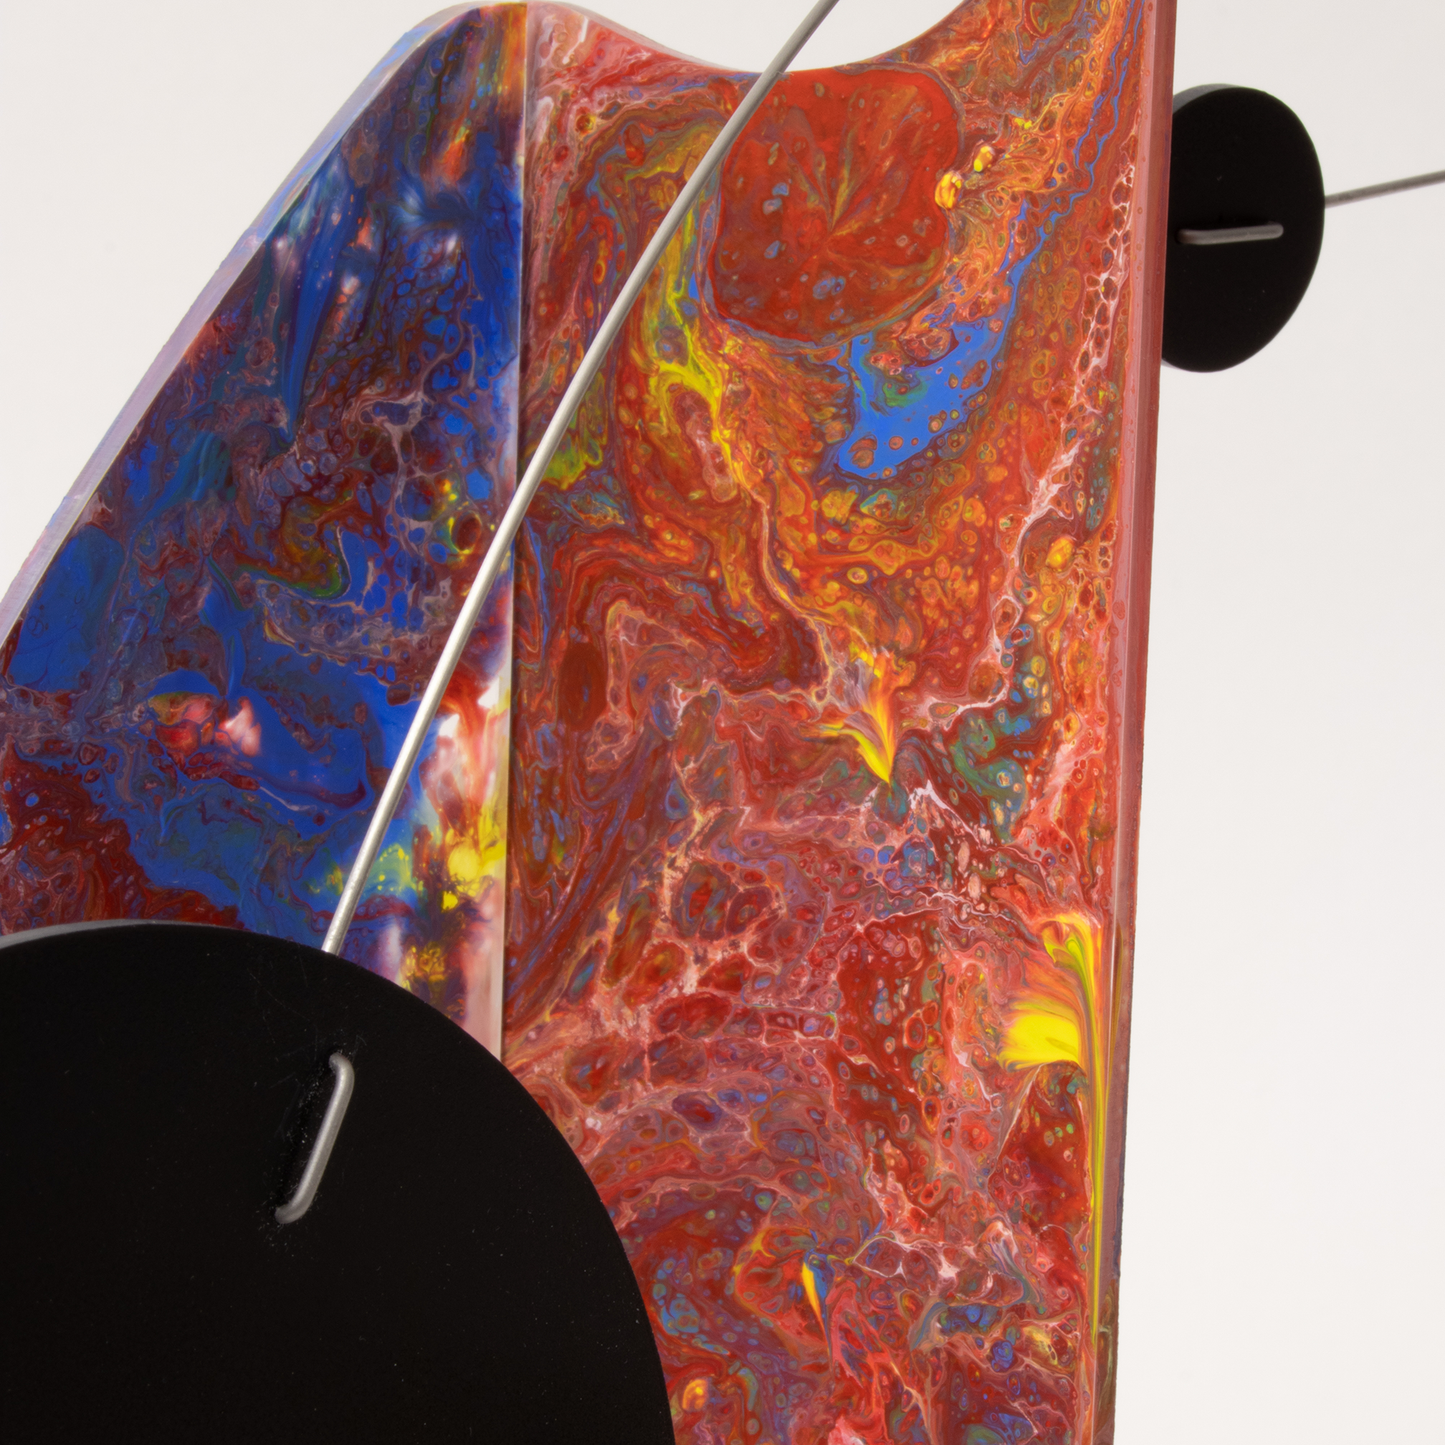 Swirly colors in this beautiful hand painted kinetic art mobile by AtomicMobiles.com - one of a kind abstract modern art